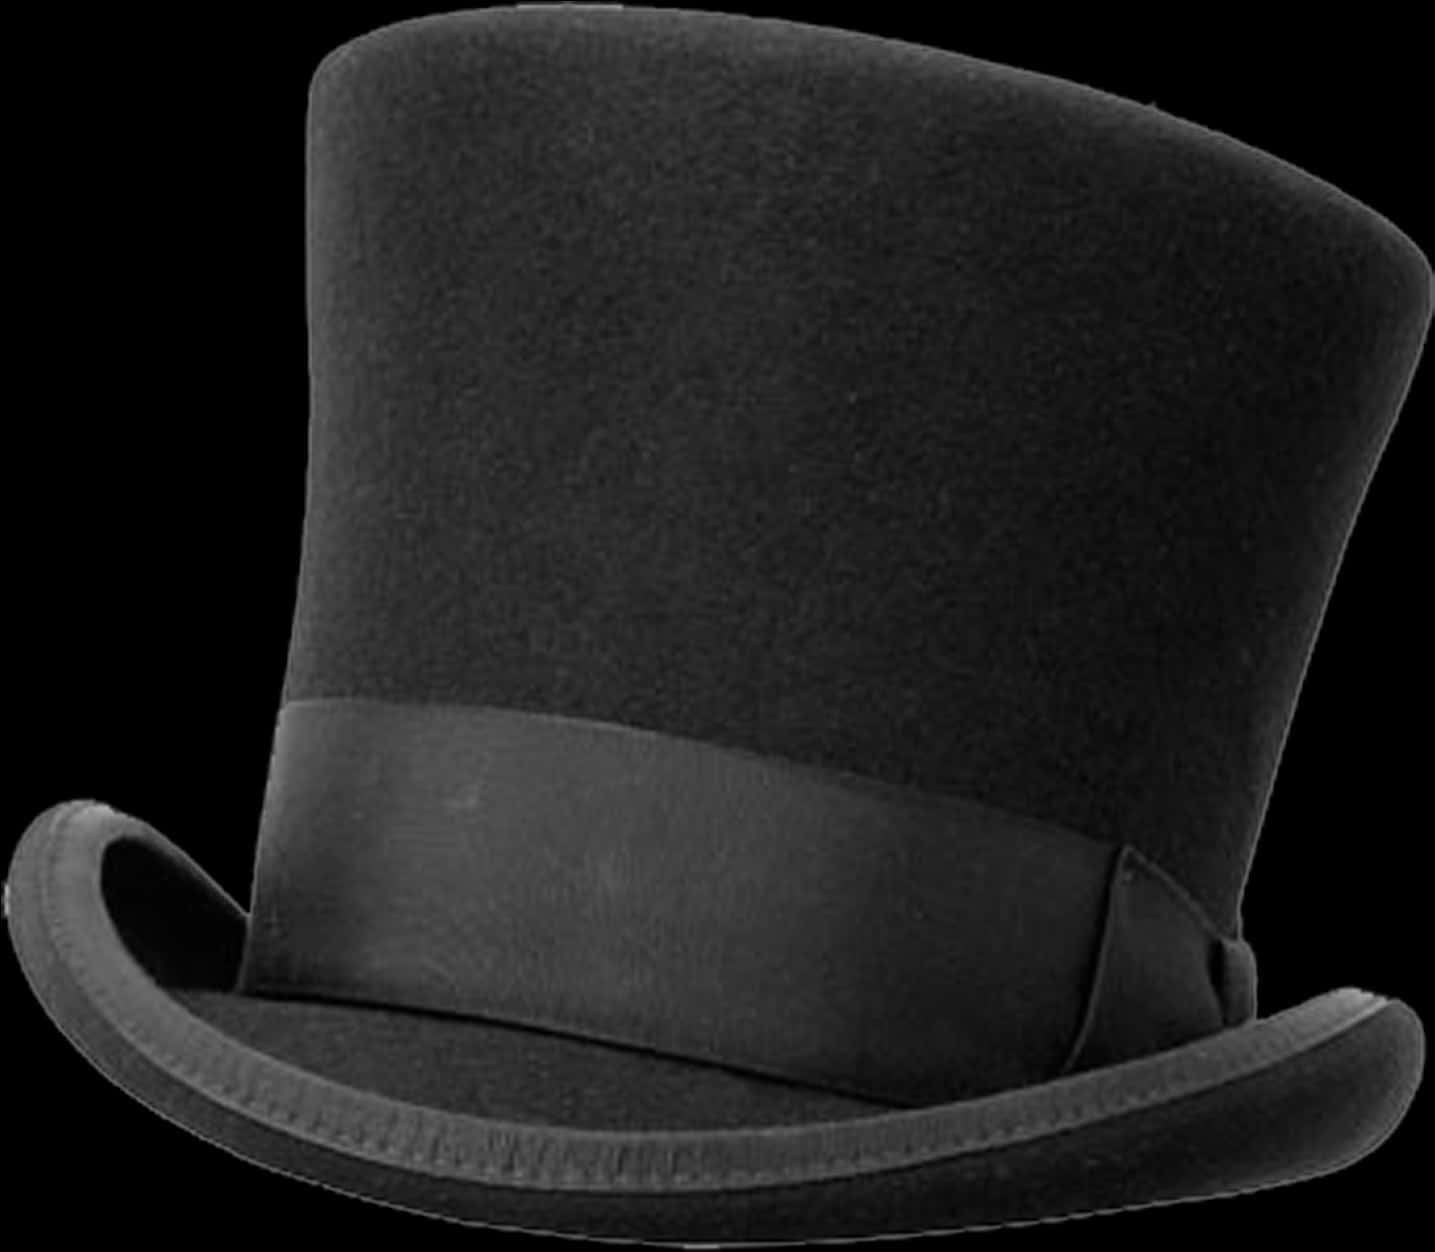 A Black Top Hat With A Black Band